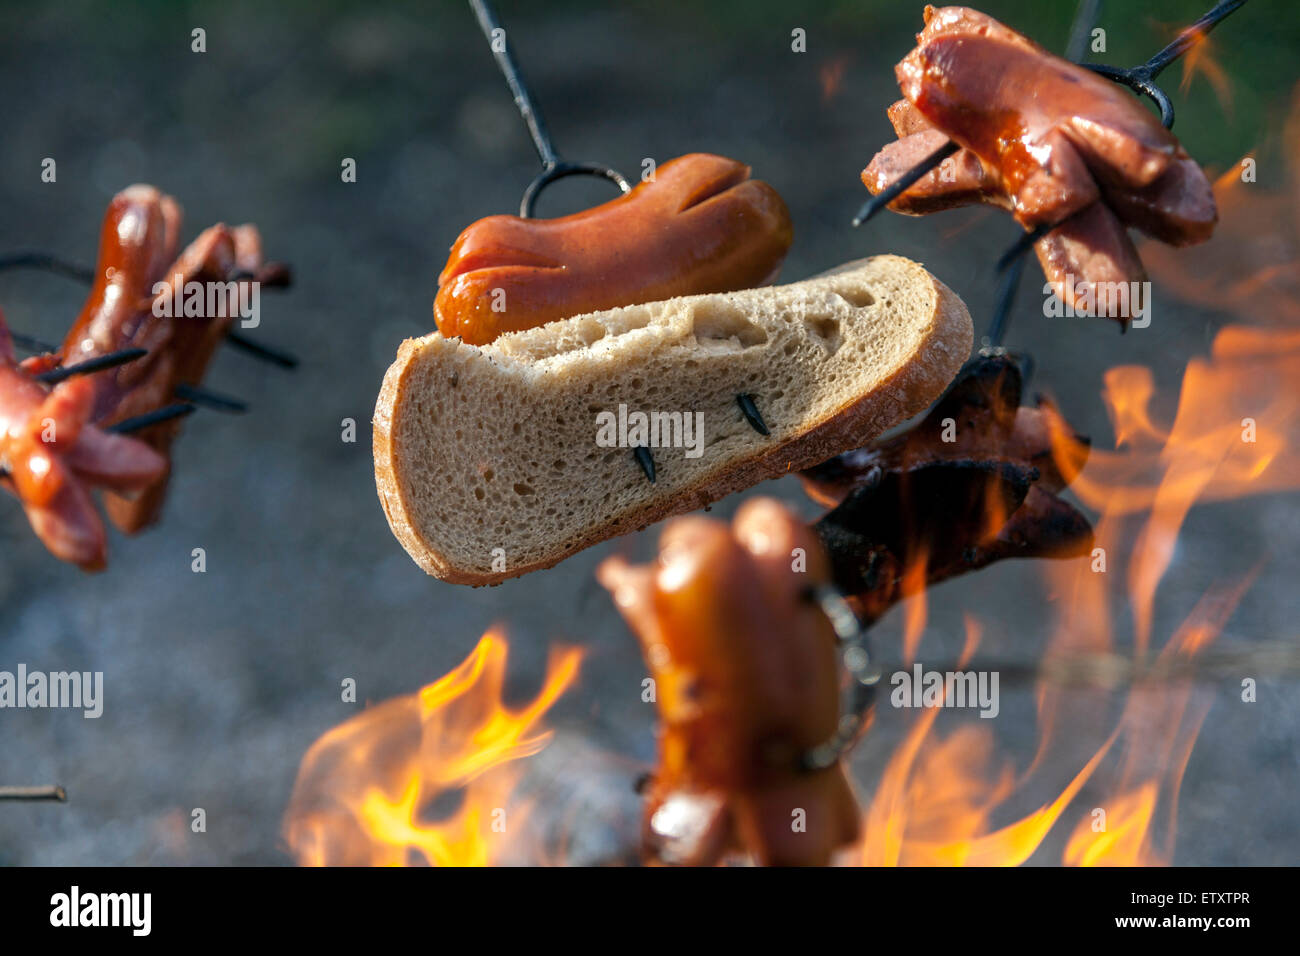 Sausage on stick over fire, bonfire party campfire bread Stock Photo